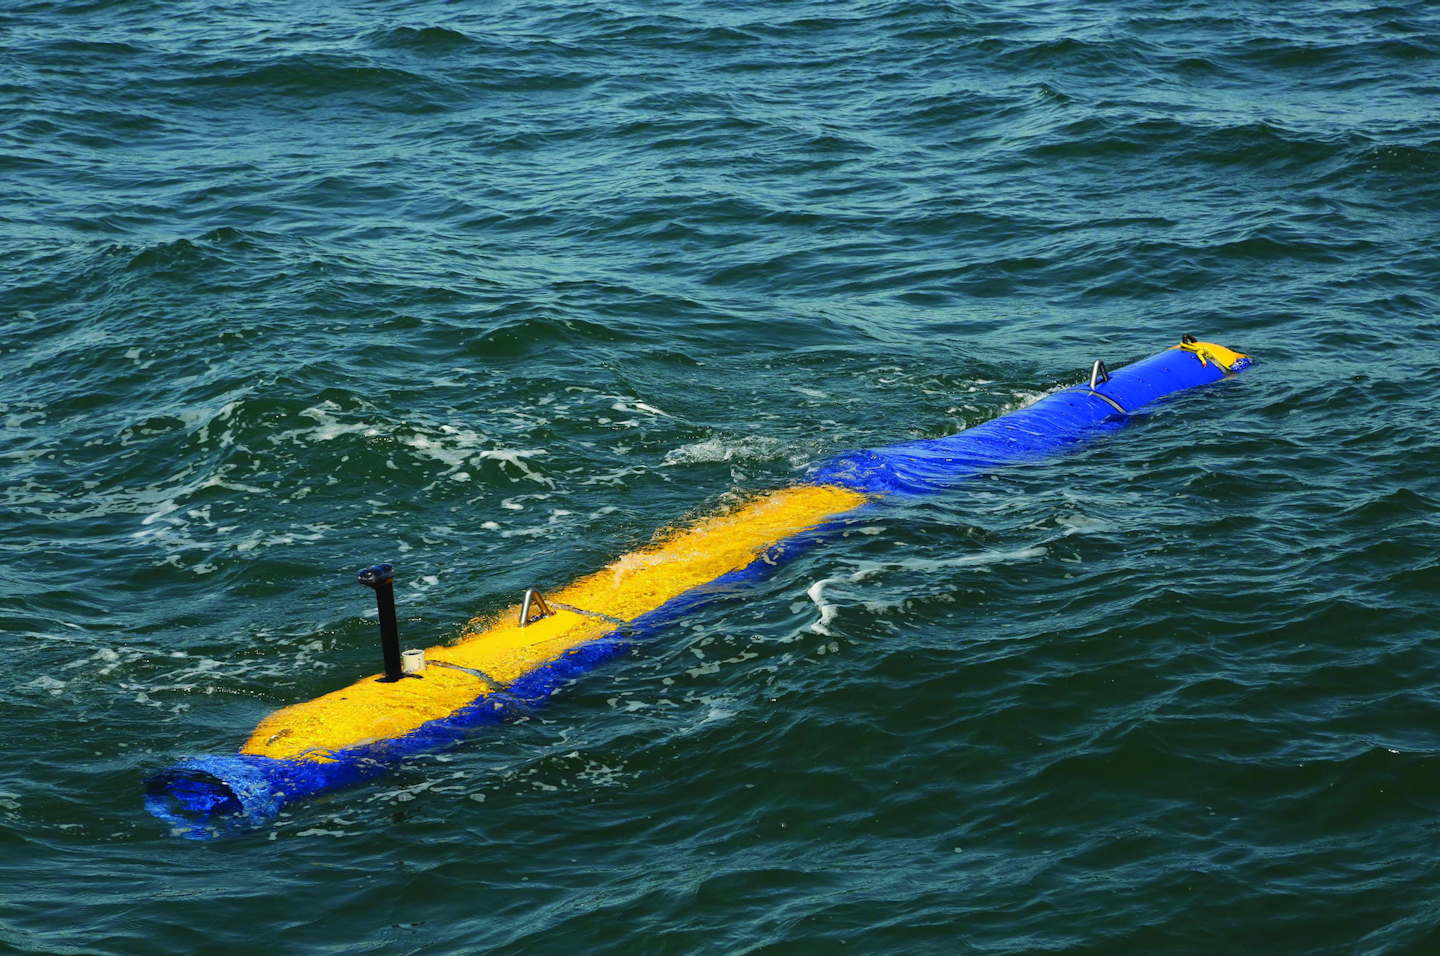 The Knifefish unmanned underwater vehicle from General Dynamics is to be an important component of Navy integrated counter-mine systems